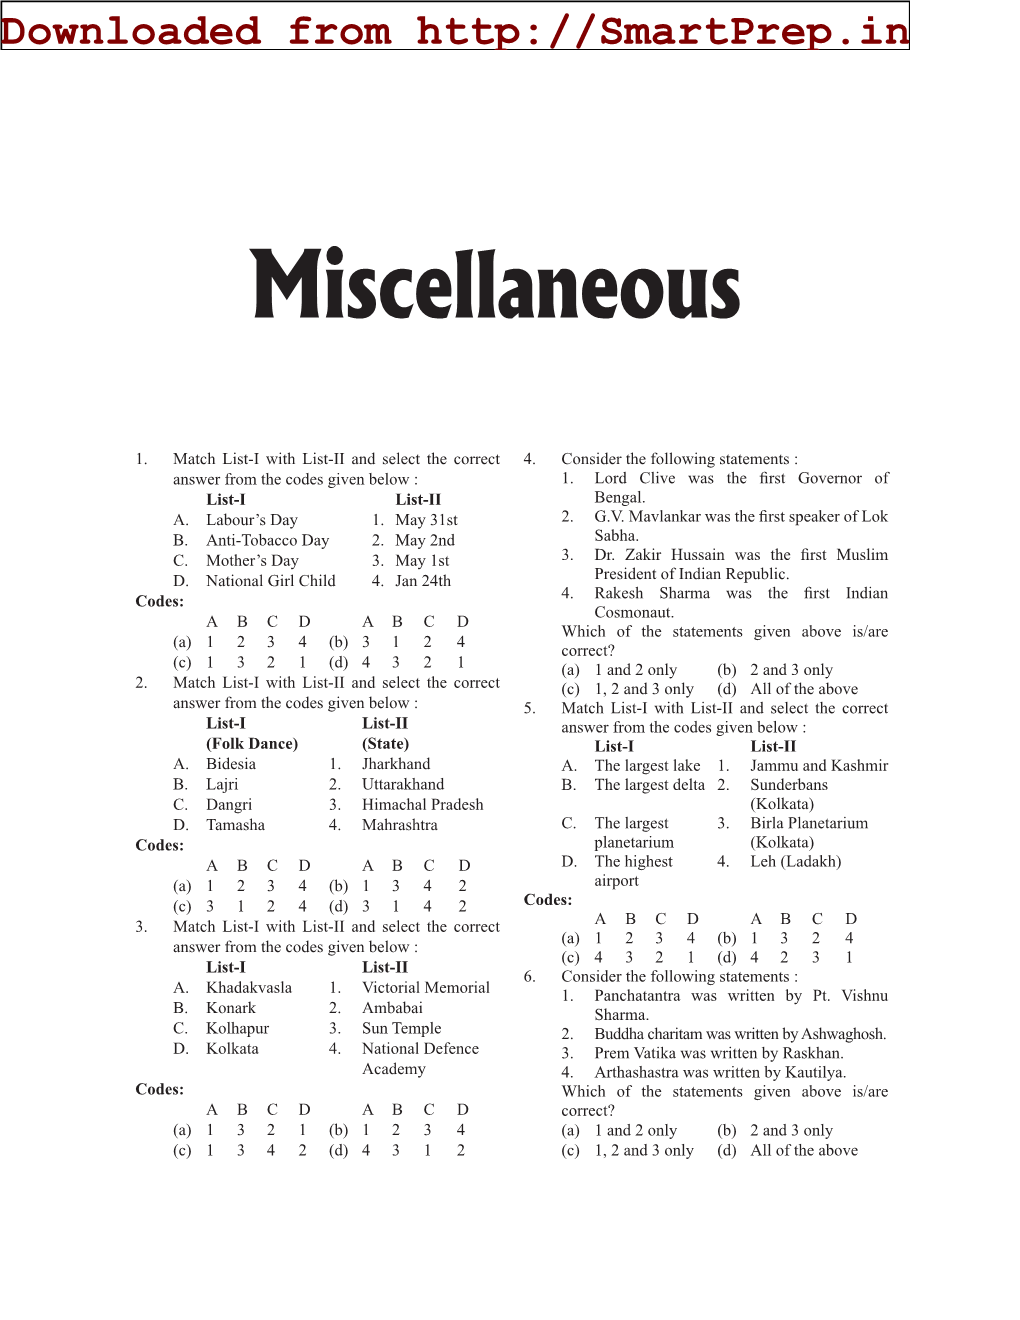 Miscellaneous Questions